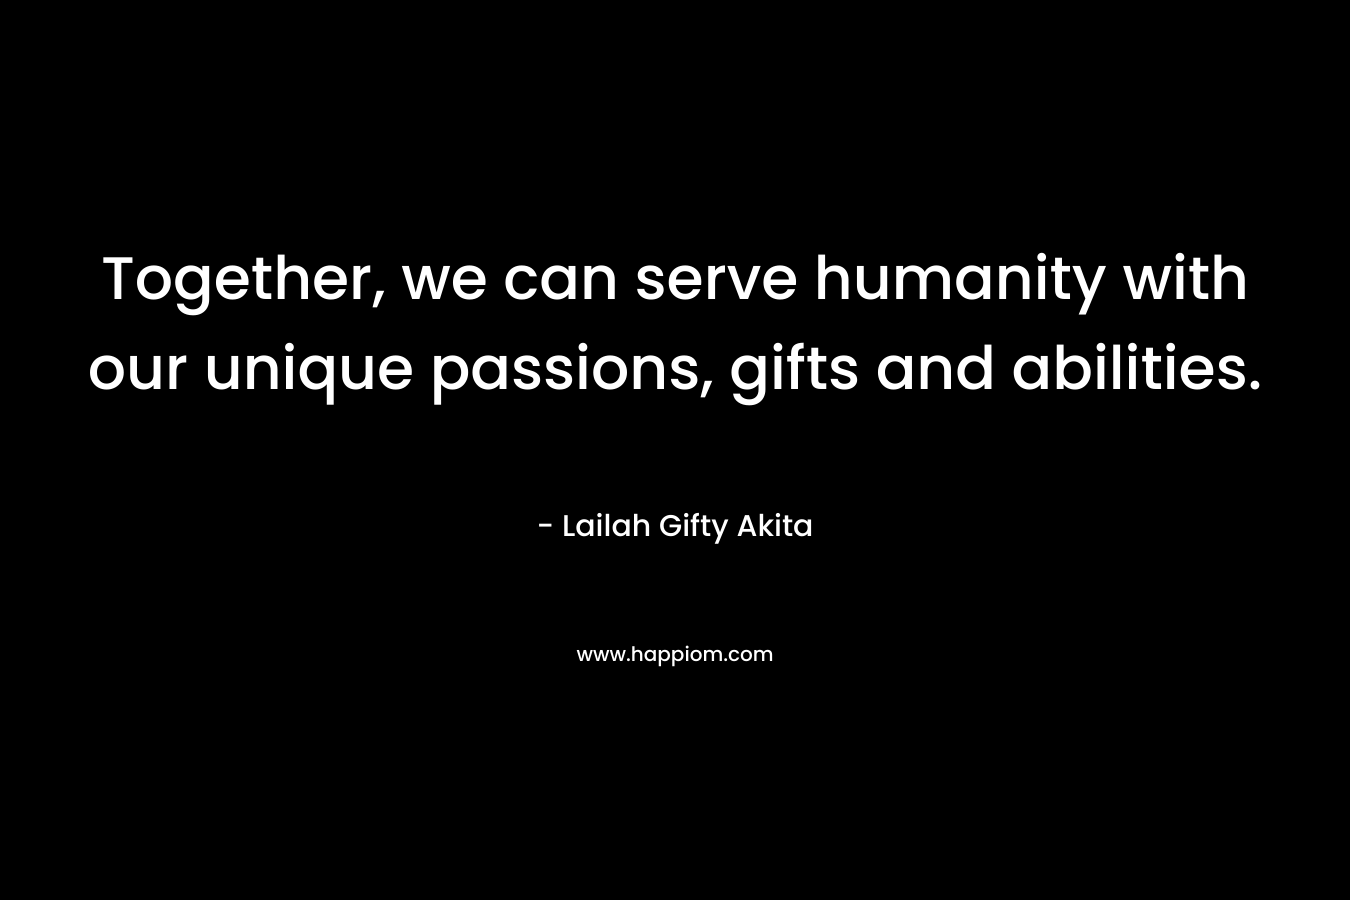 Together, we can serve humanity with our unique passions, gifts and abilities.